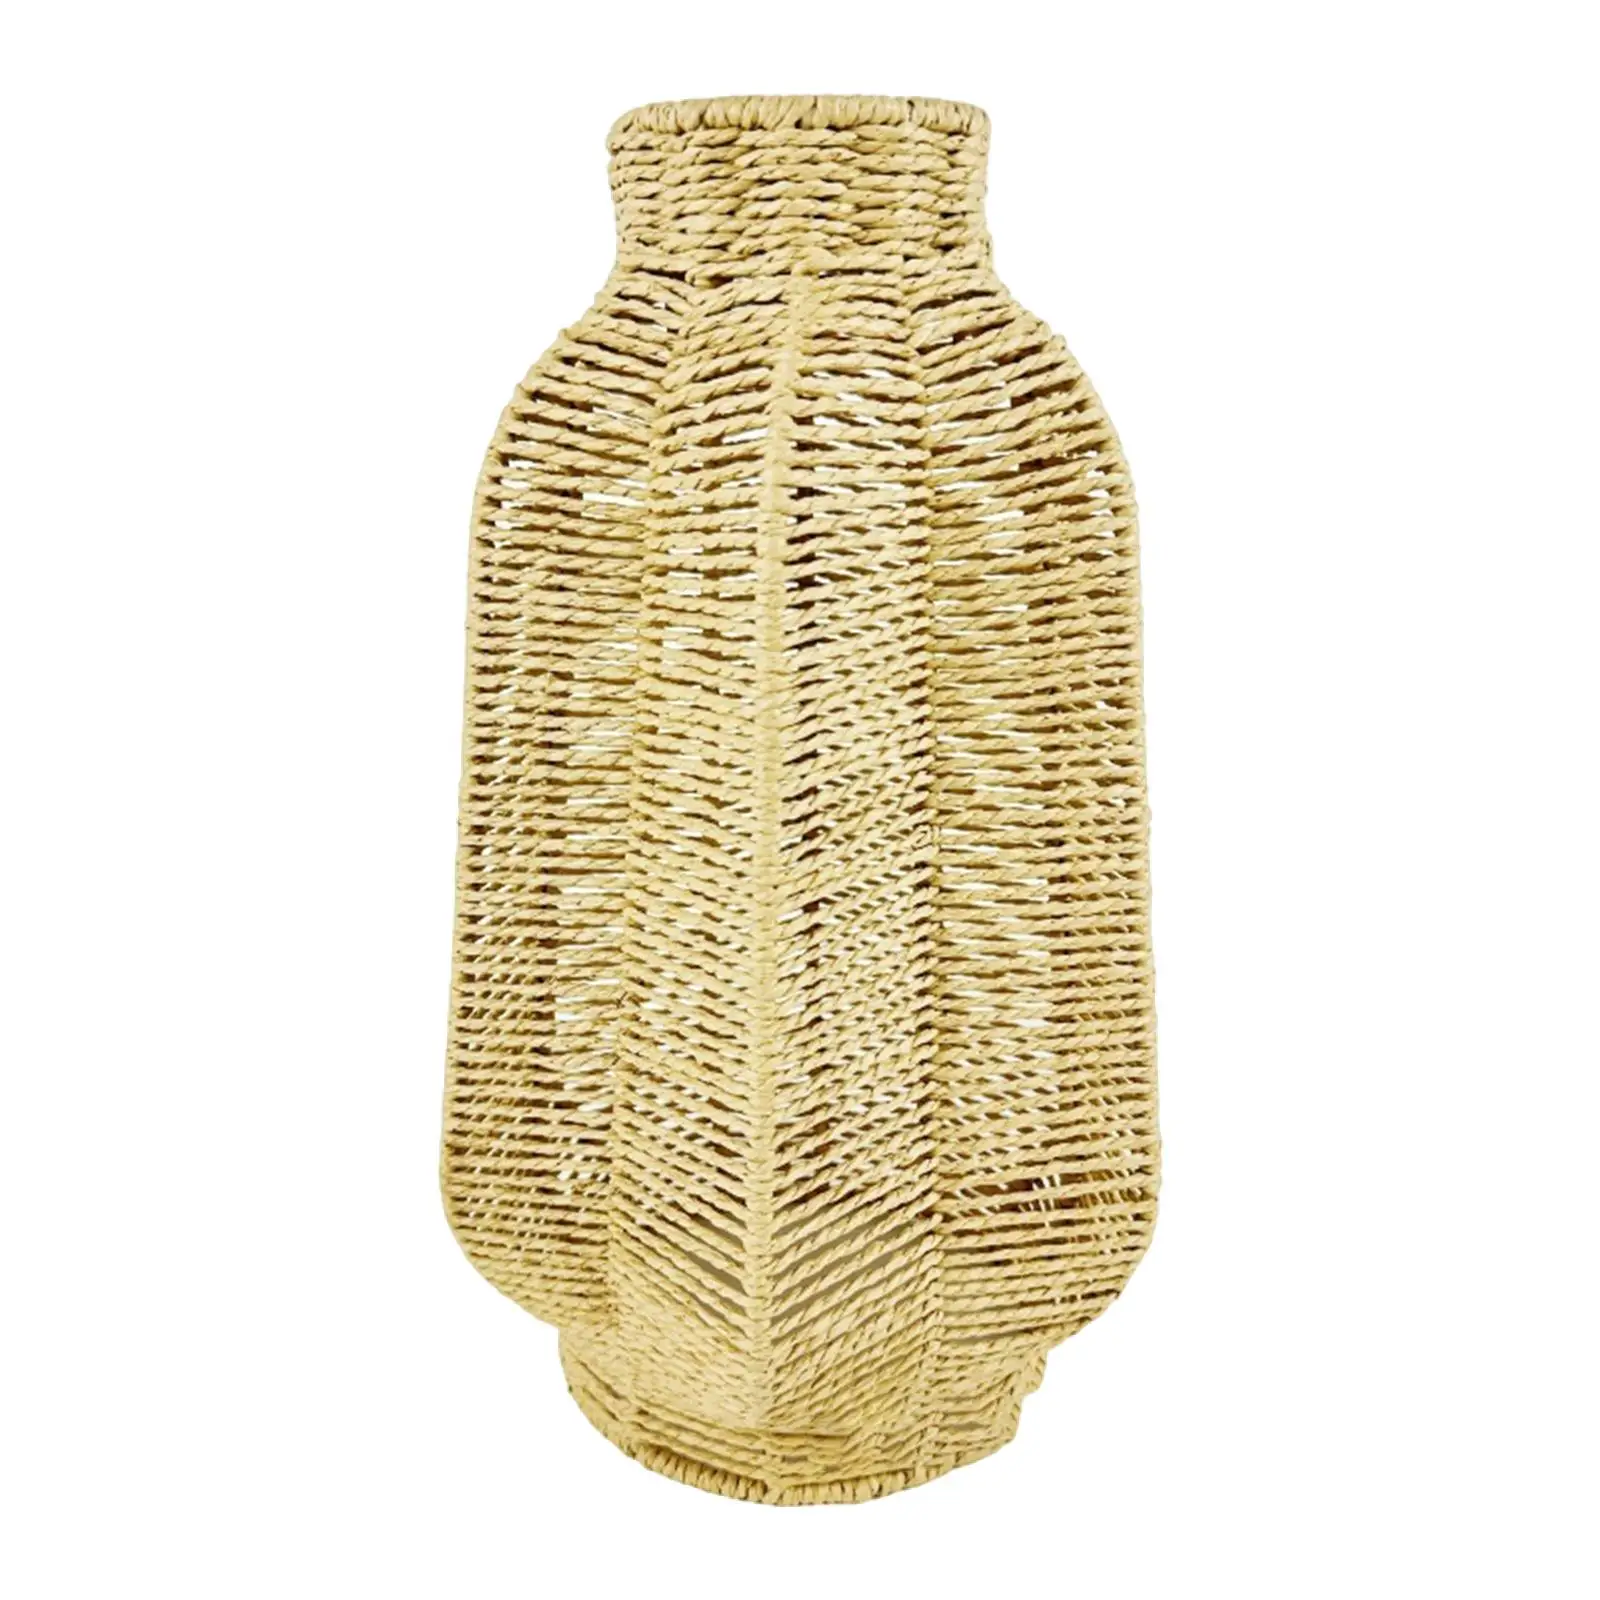 Handwoven Rattan Lamp Shade Bulb Guard Chandelier Shade Paper Rope Lampshade Light Fixture Shade for Teahouse Kitchen Cafe